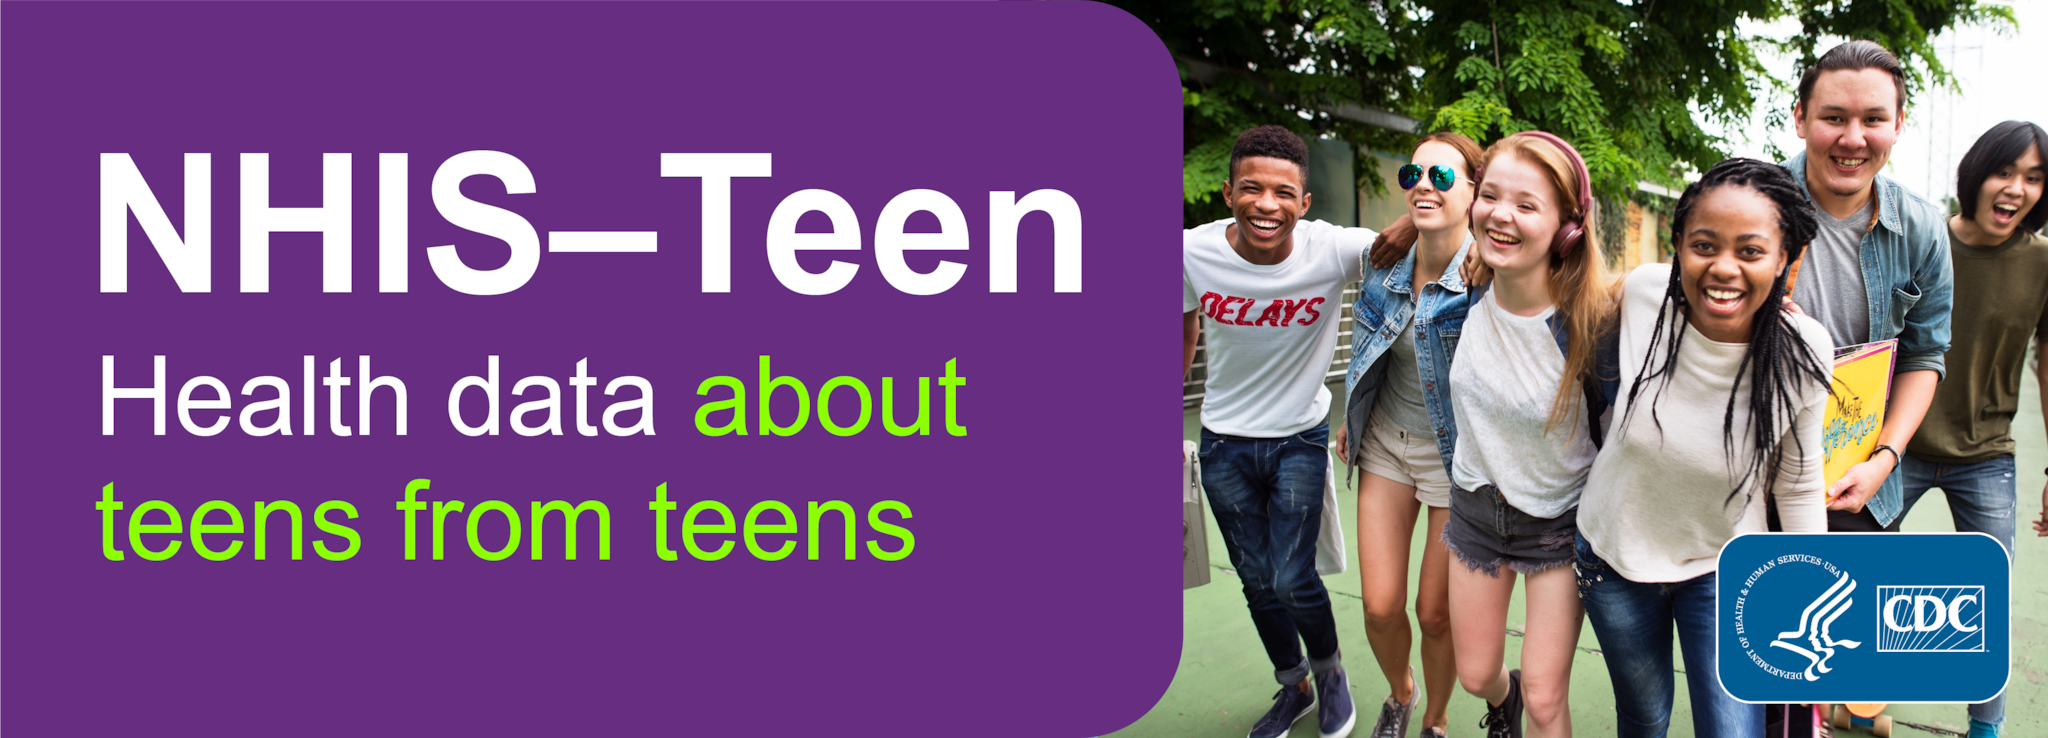 Group of teens hanging out on the right. On left, text: NHIS-Teen Health data about teens from teens.